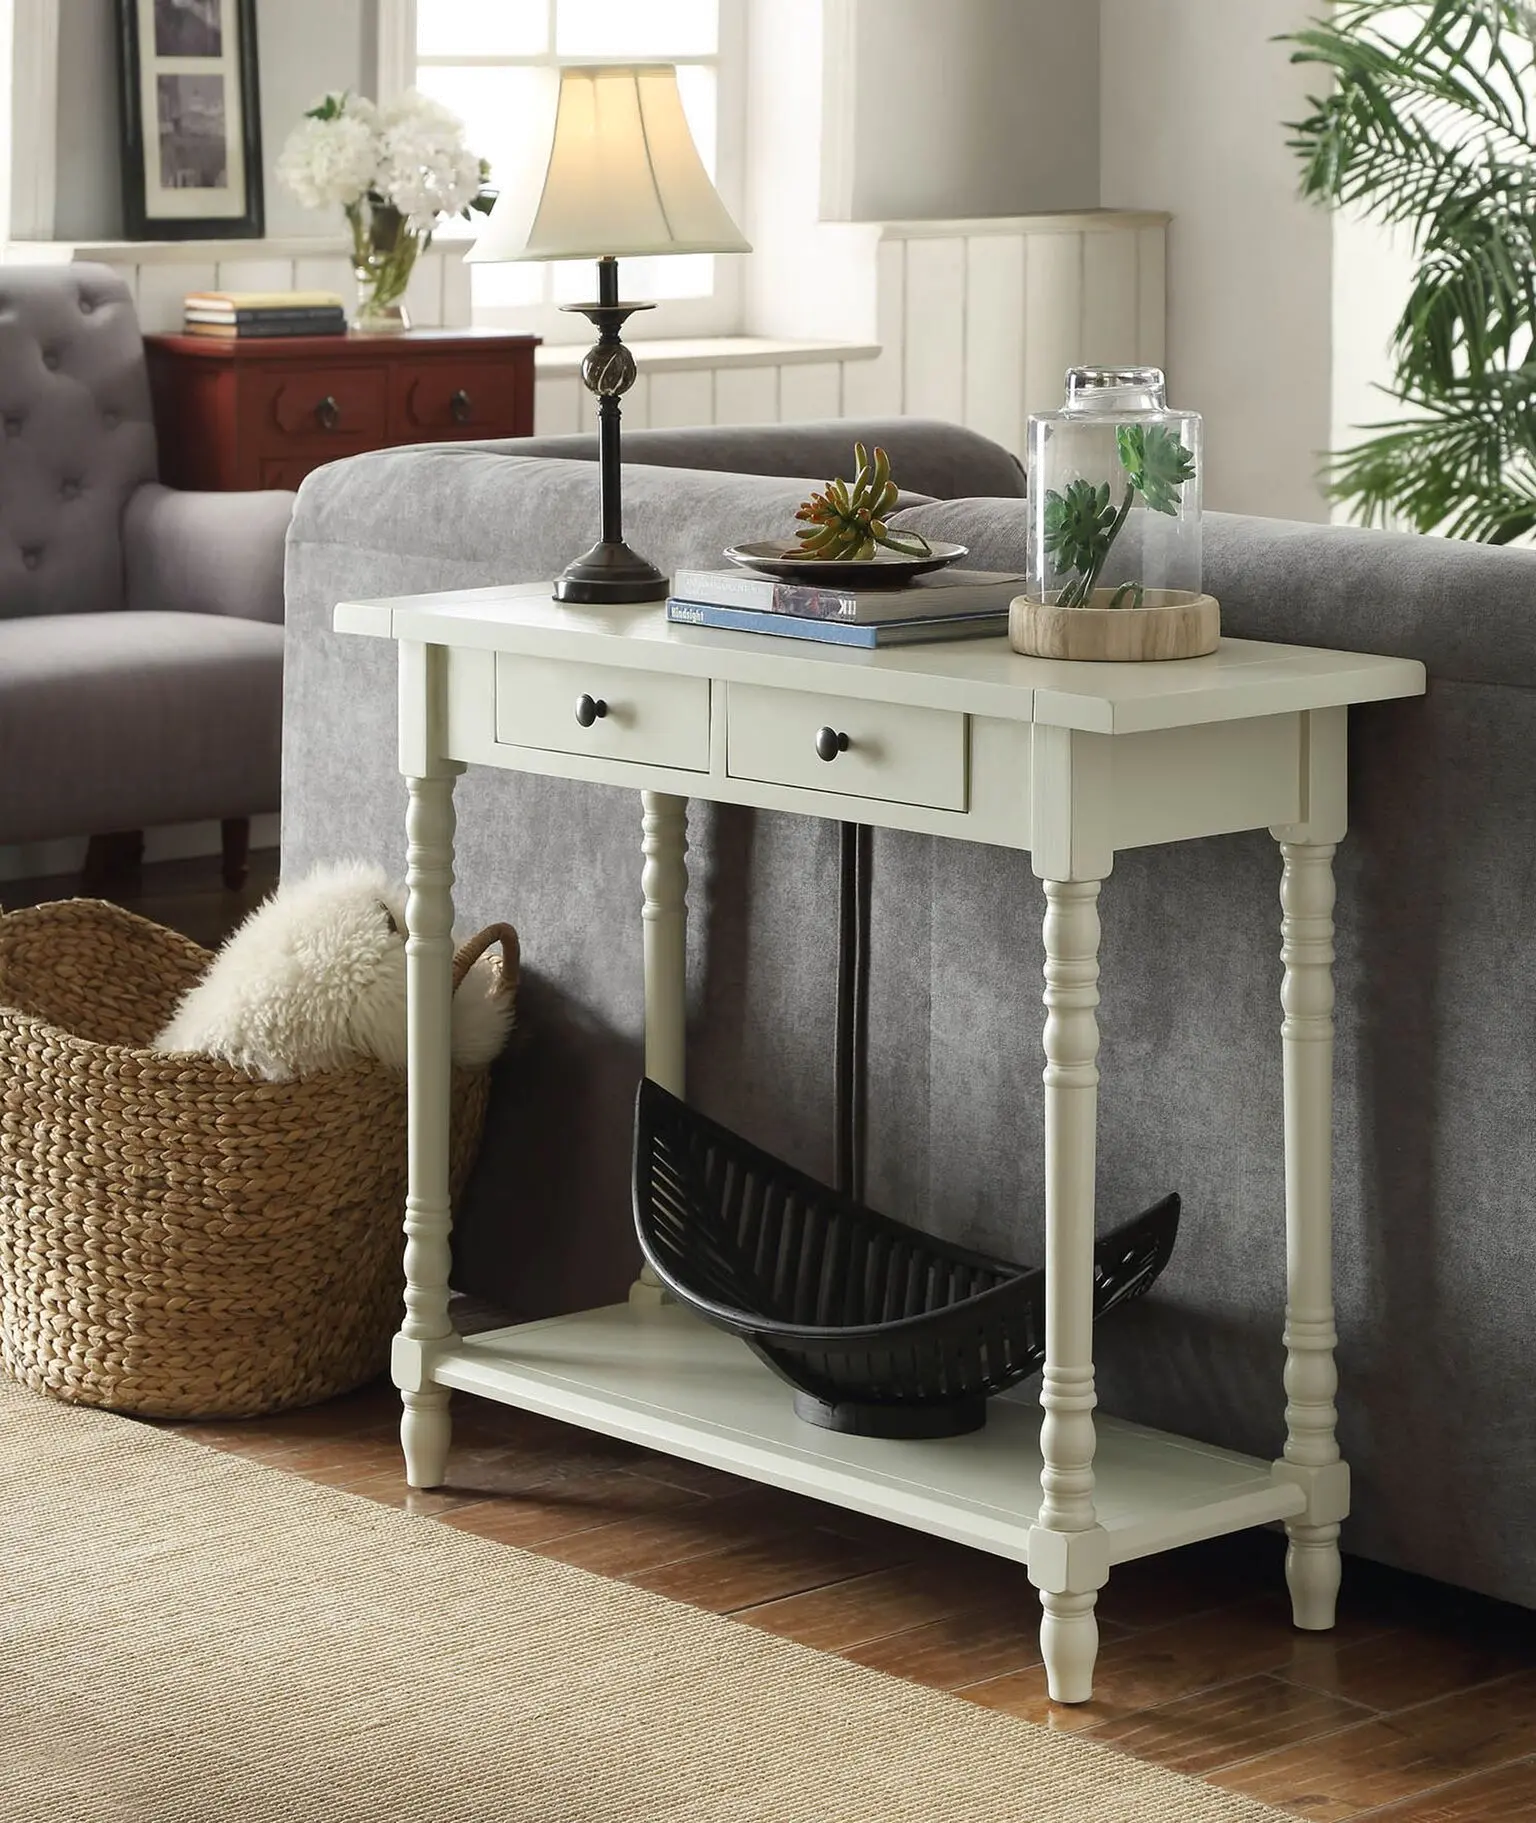 570479 Buttermilk White Entry Table - Simplicity sku 570479